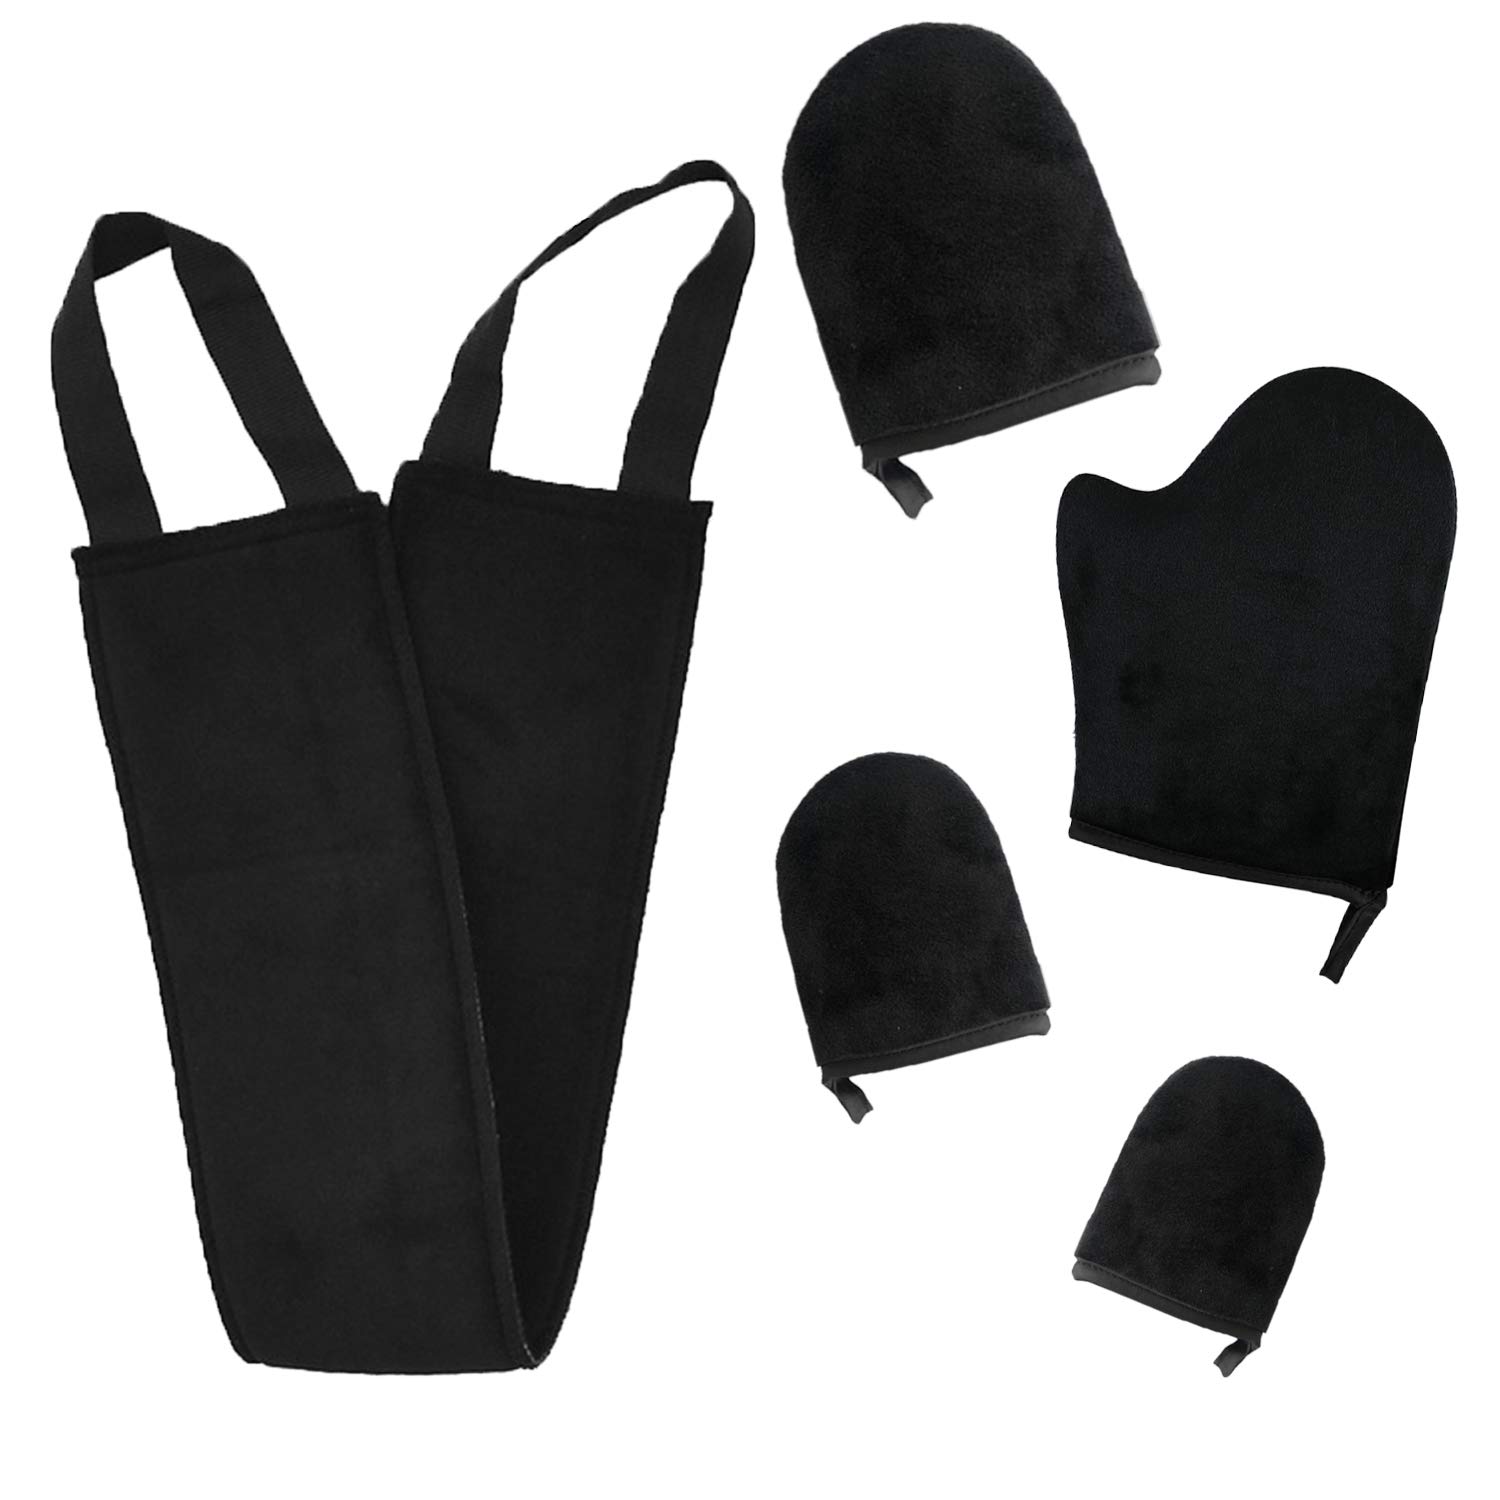 Hottest self tanning applicator mitts sets